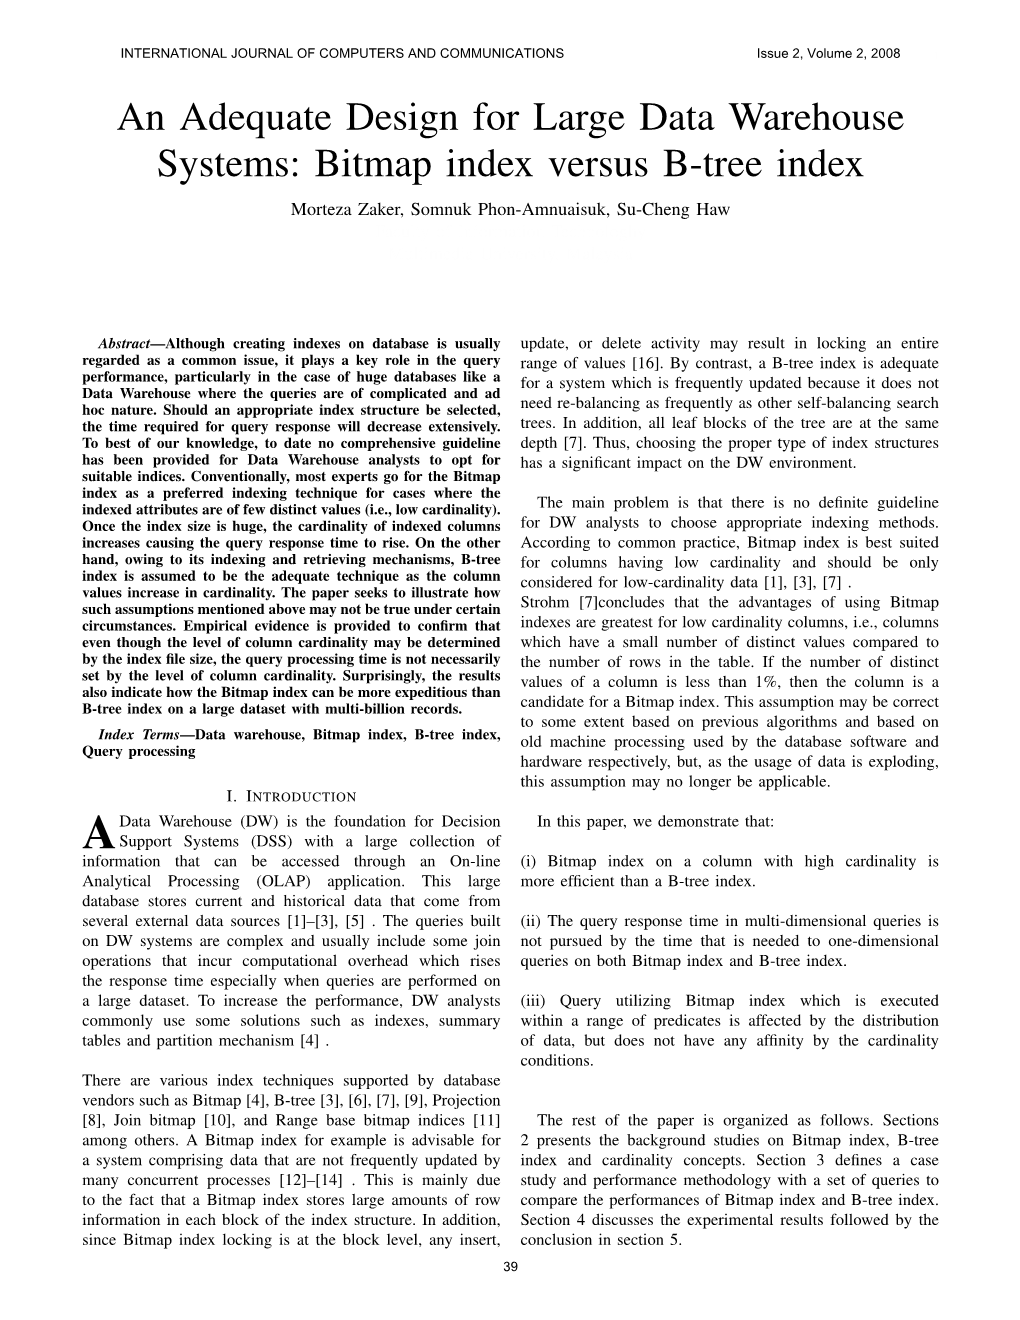 An Adequate Design for Large Data Warehouse Systems: Bitmap Index